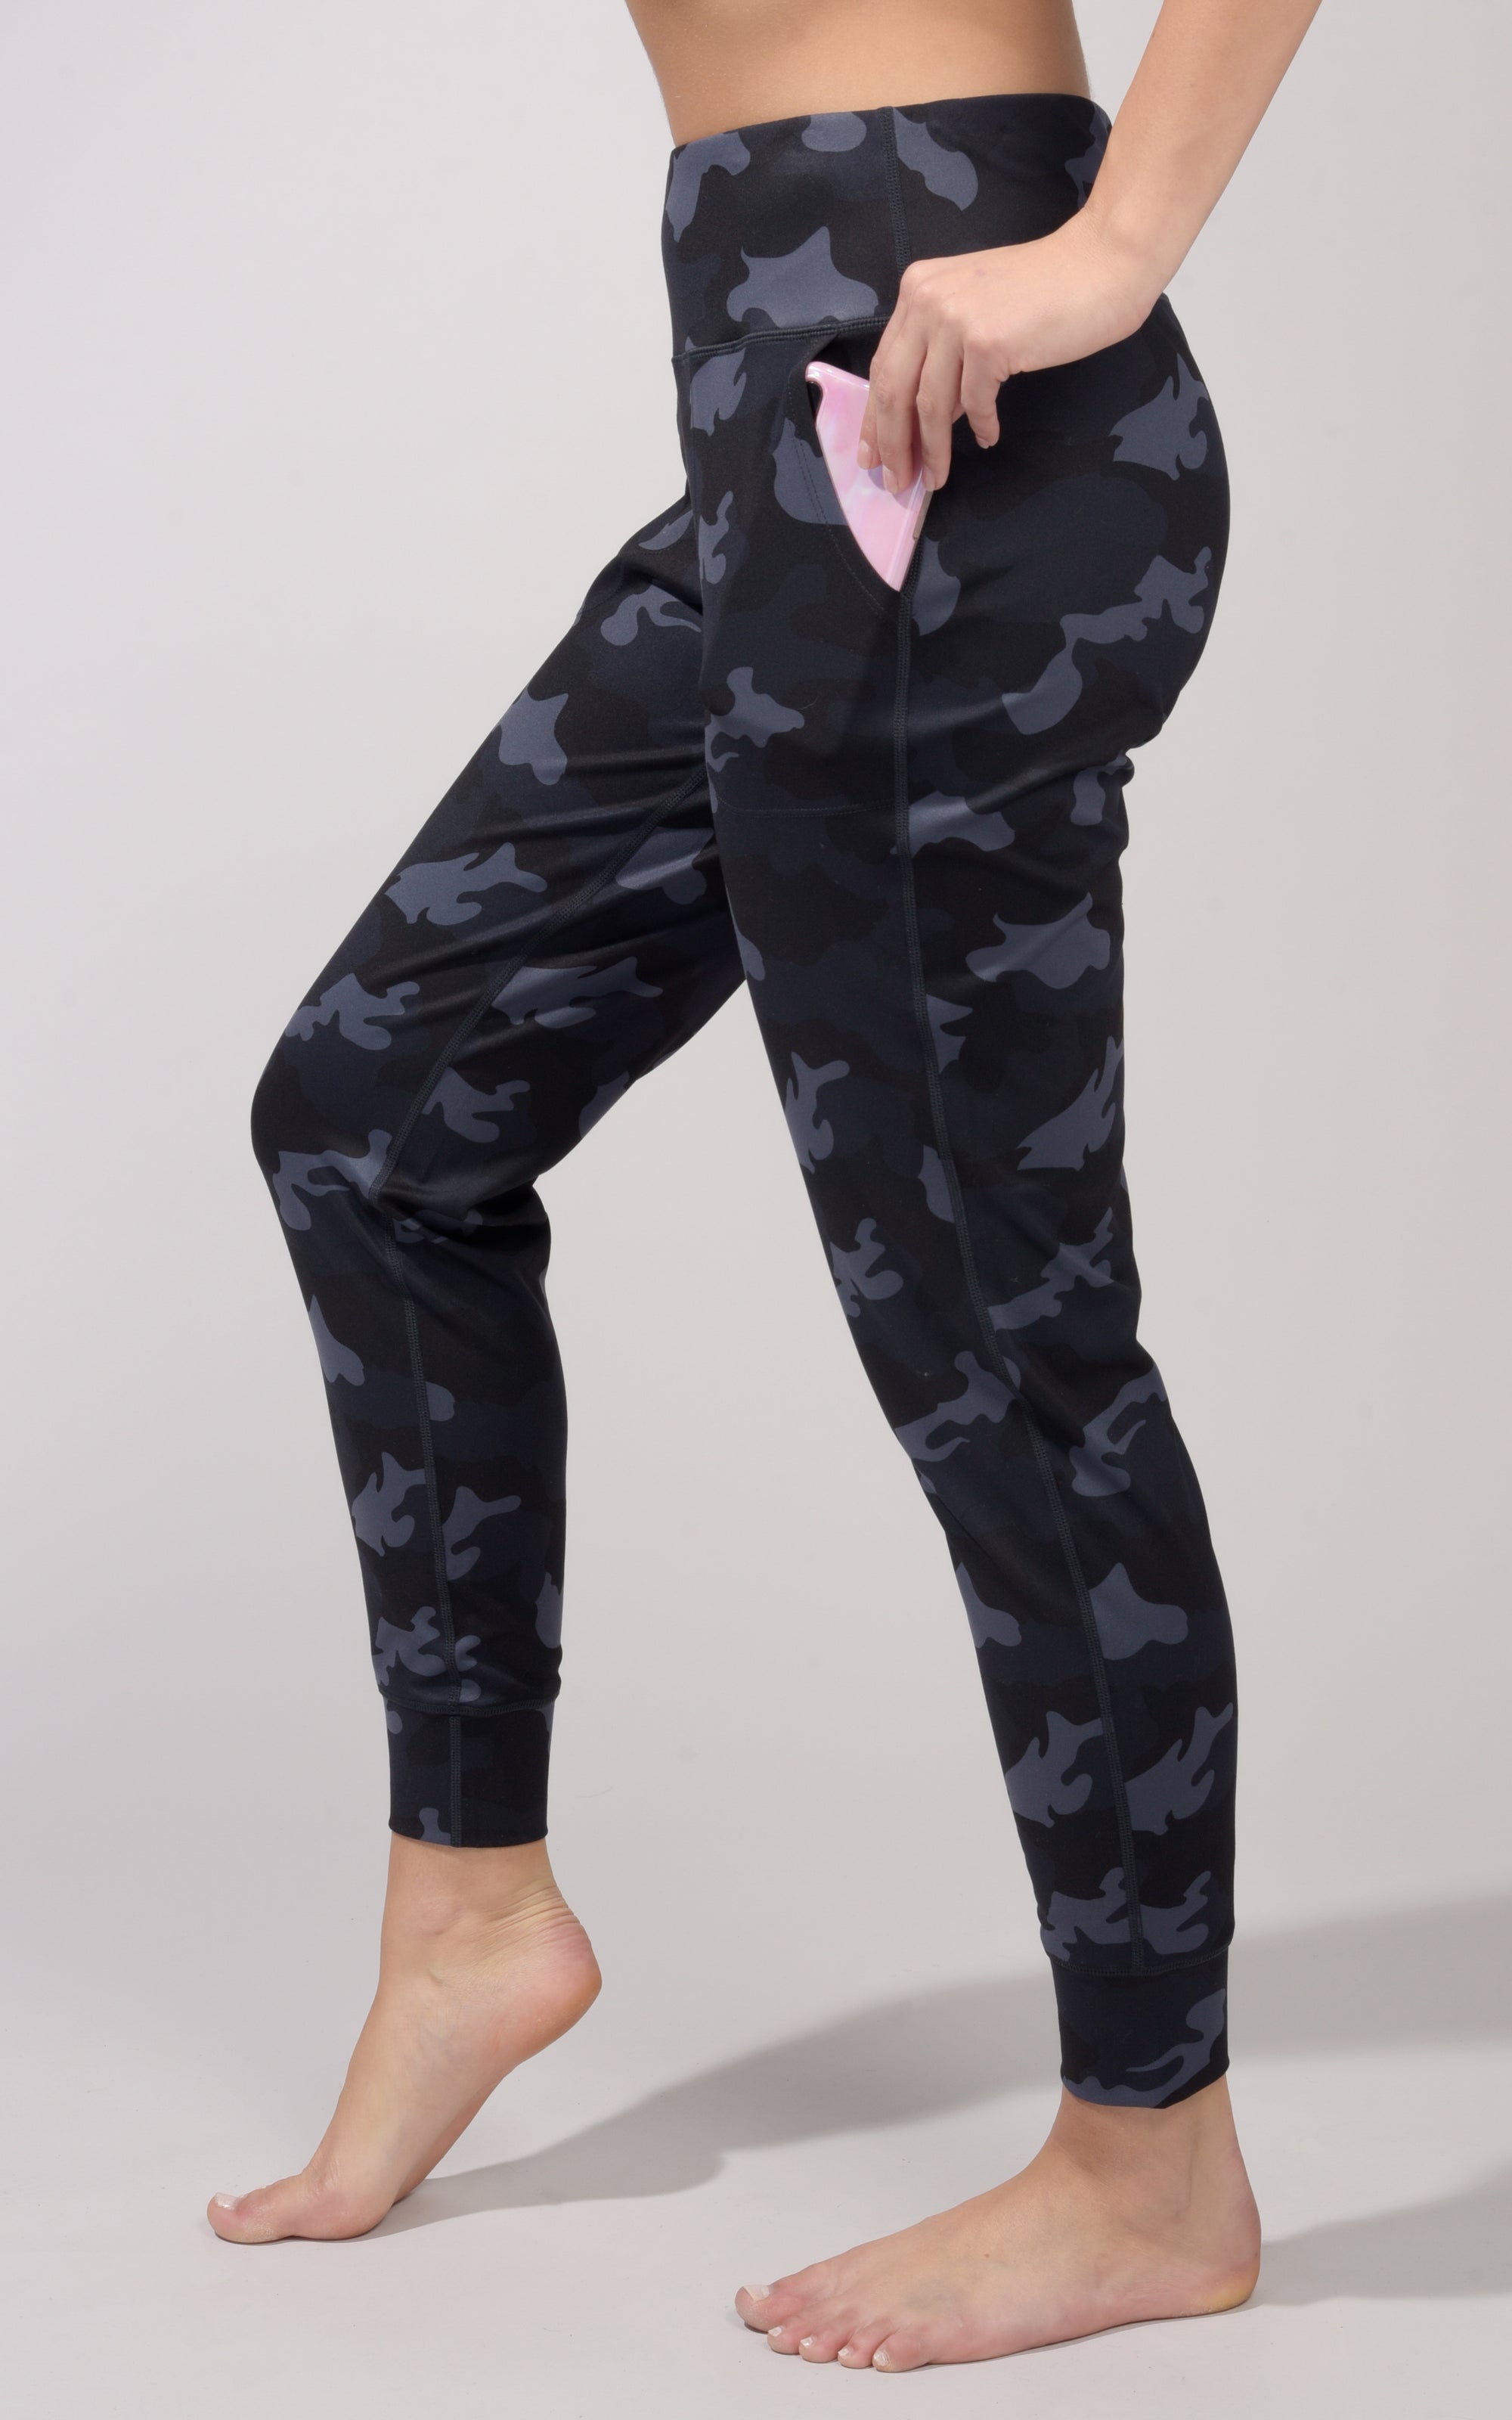 Yogalicious Lux black & white stretchy with pockets short leggings